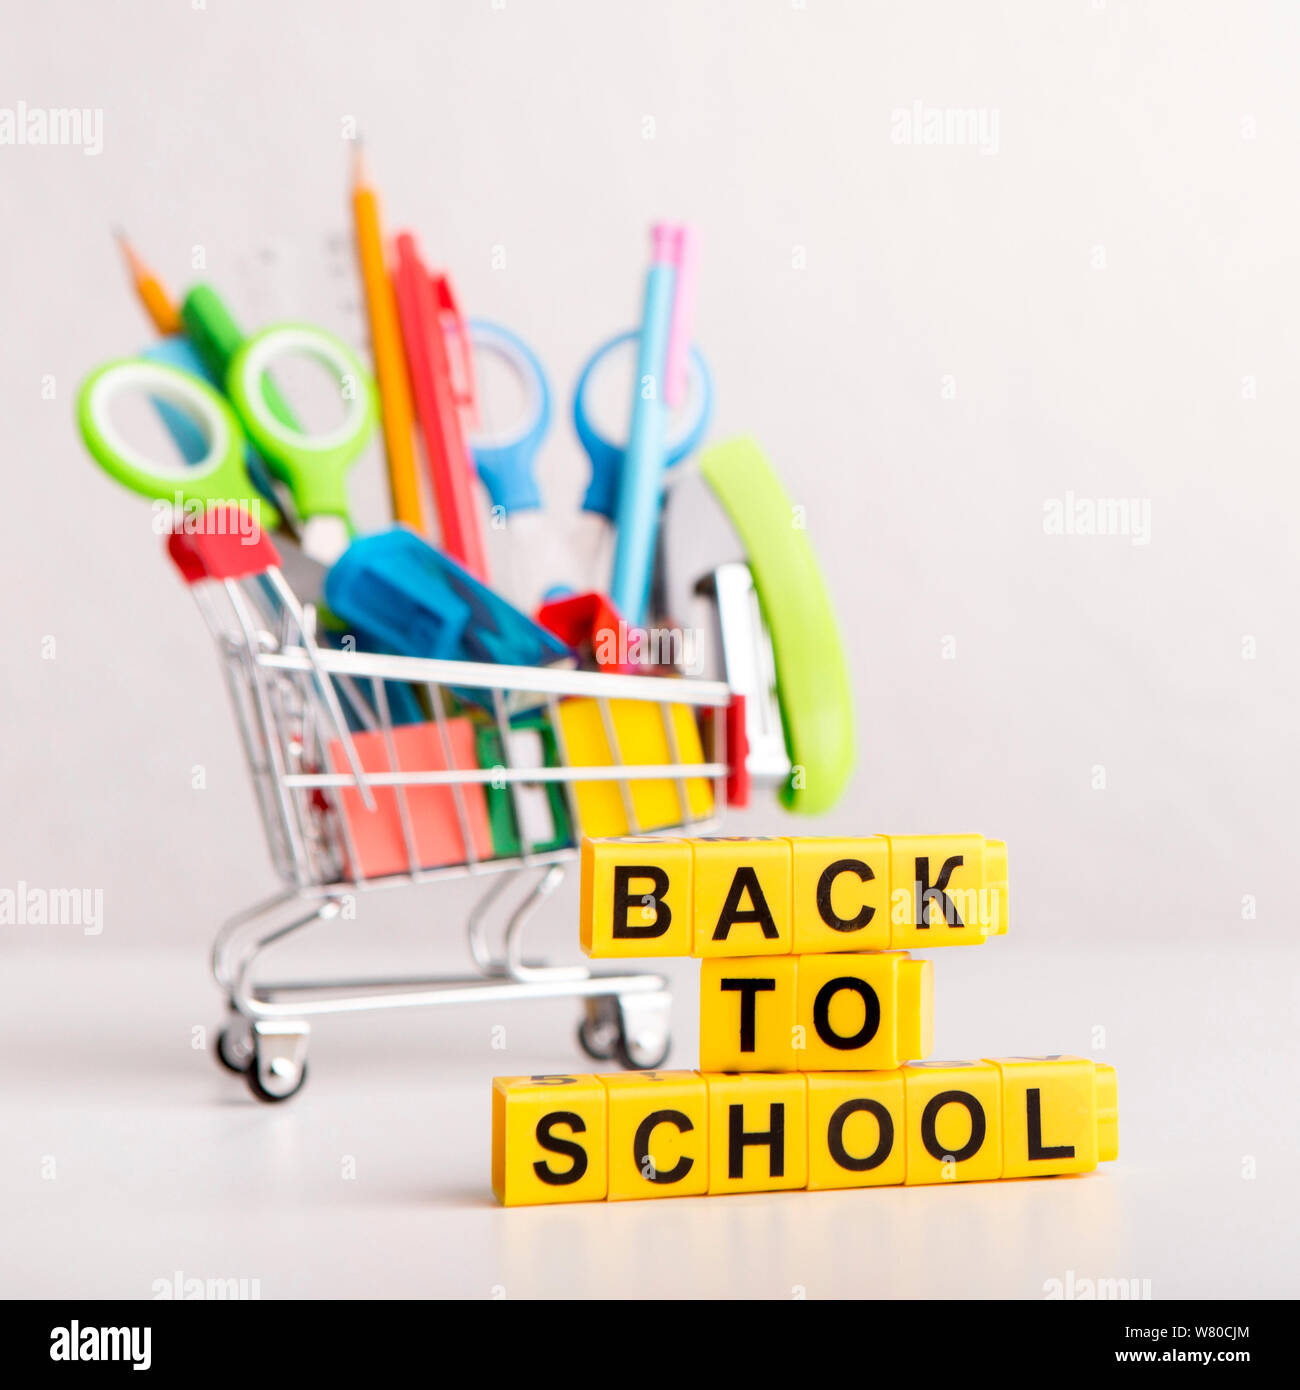 Back to school text with office supplies in shopping truck Stock Photo